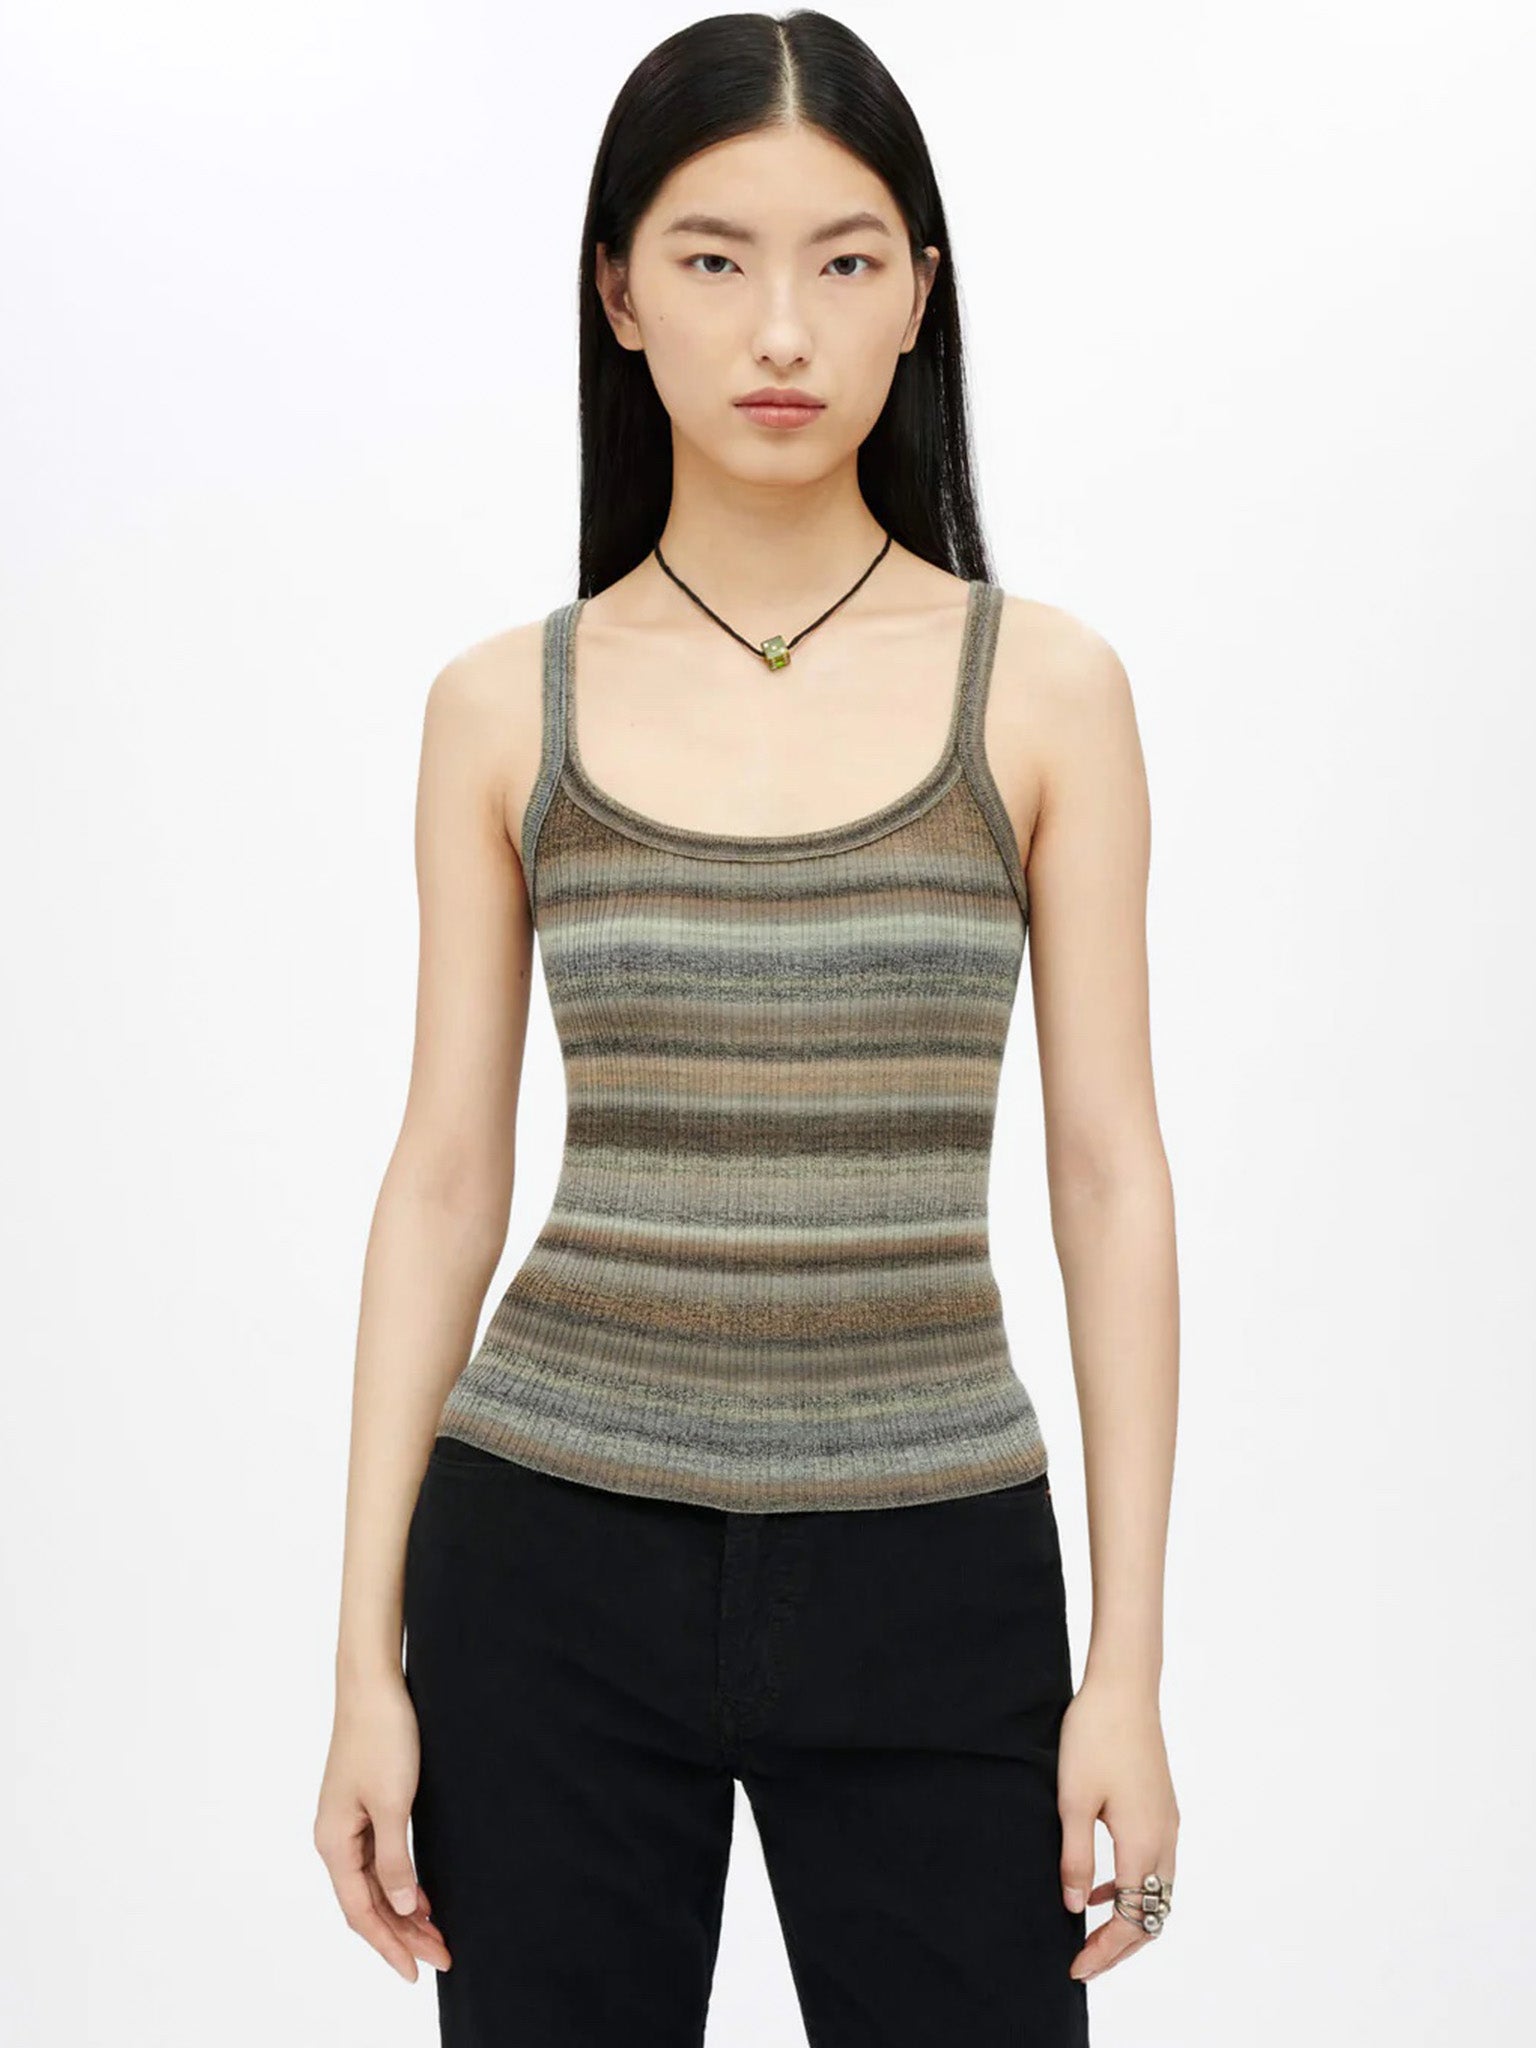 redone-ribbed-top-grey-space-dye